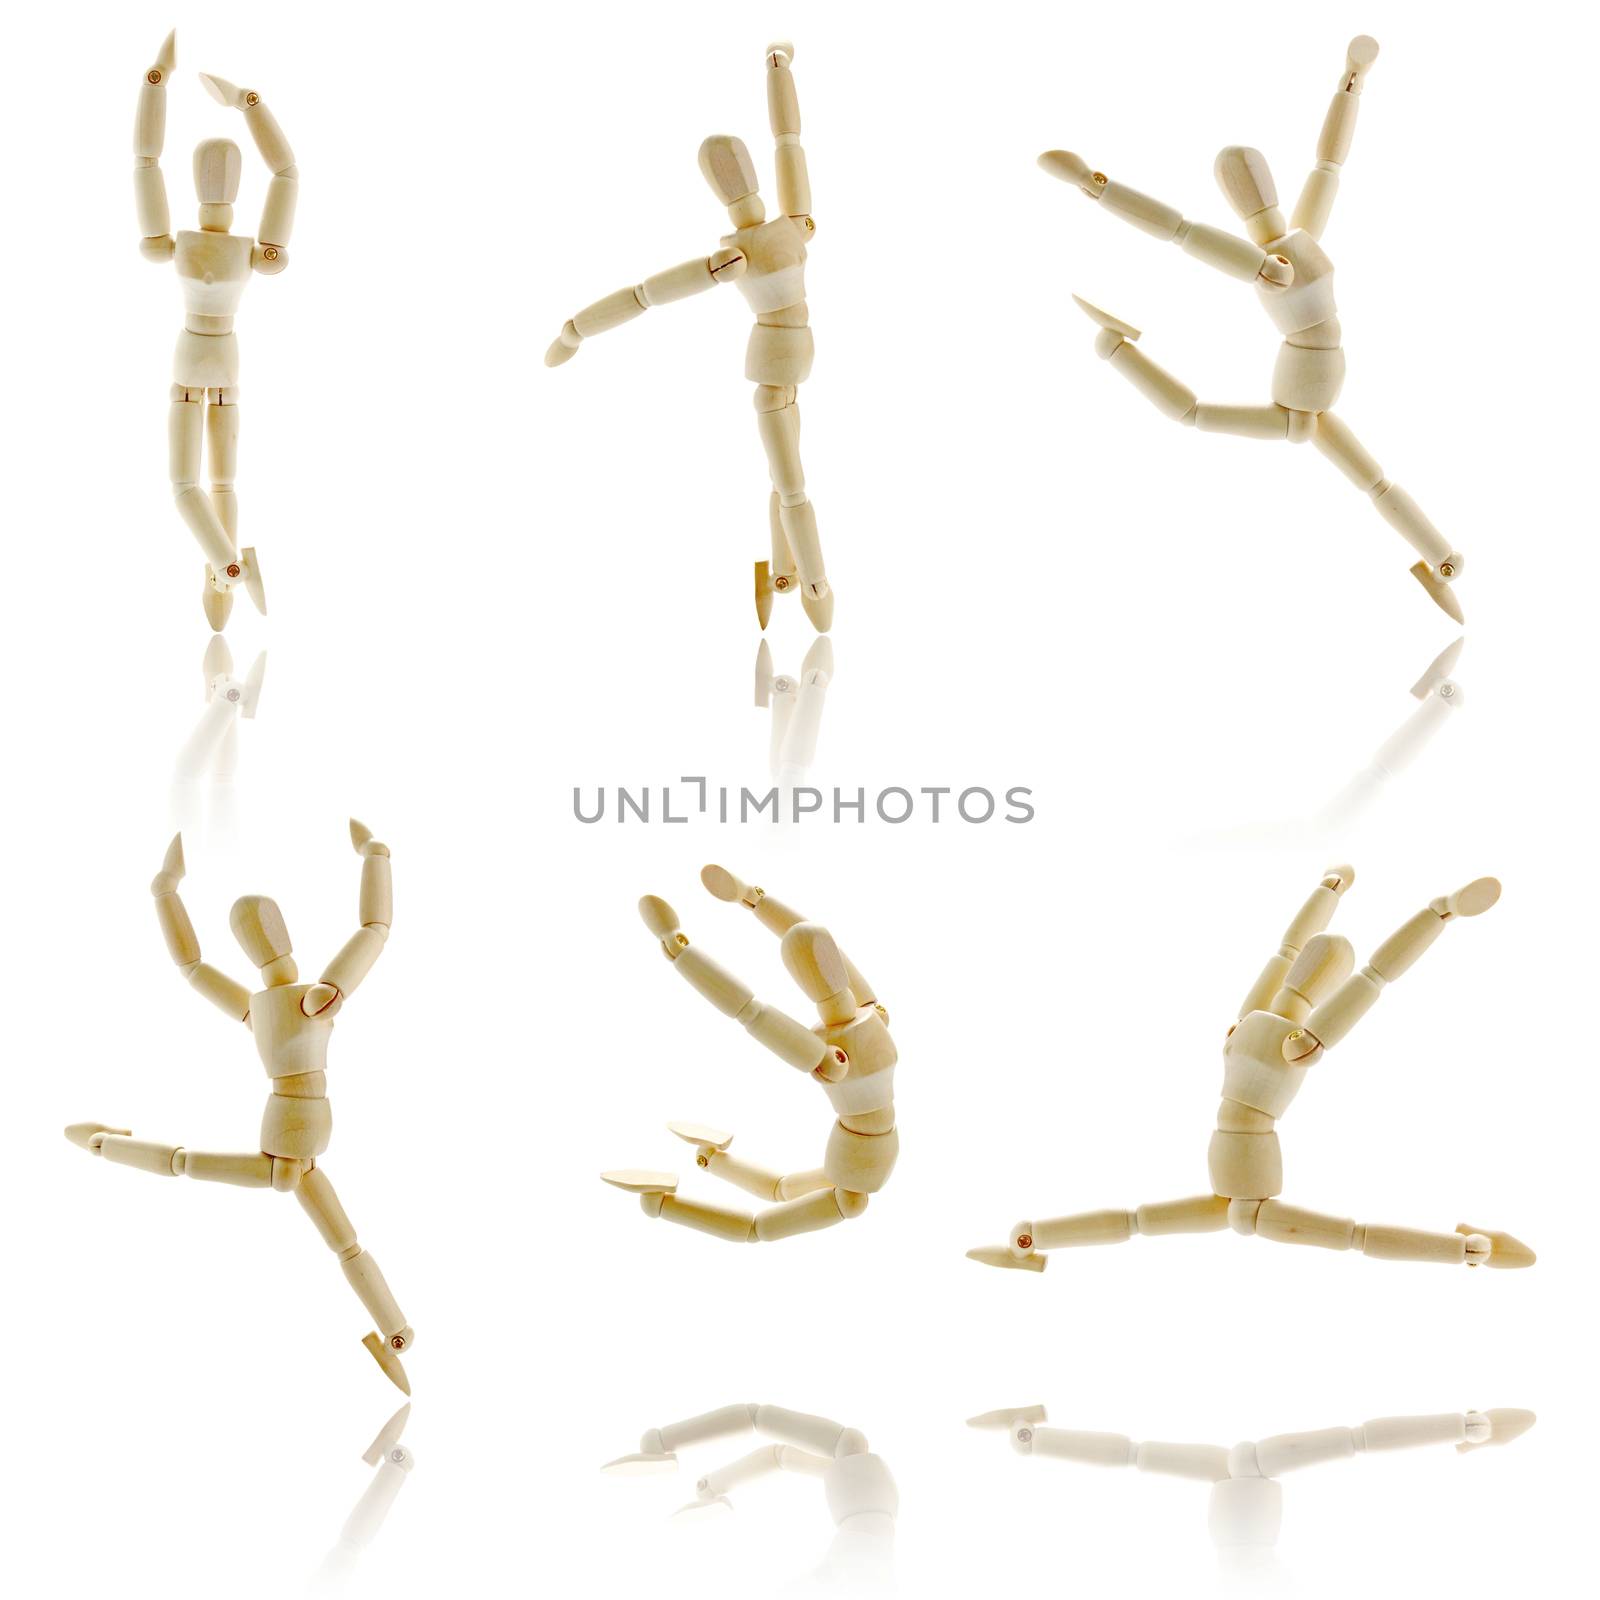 Dance poses by dynamicfoto